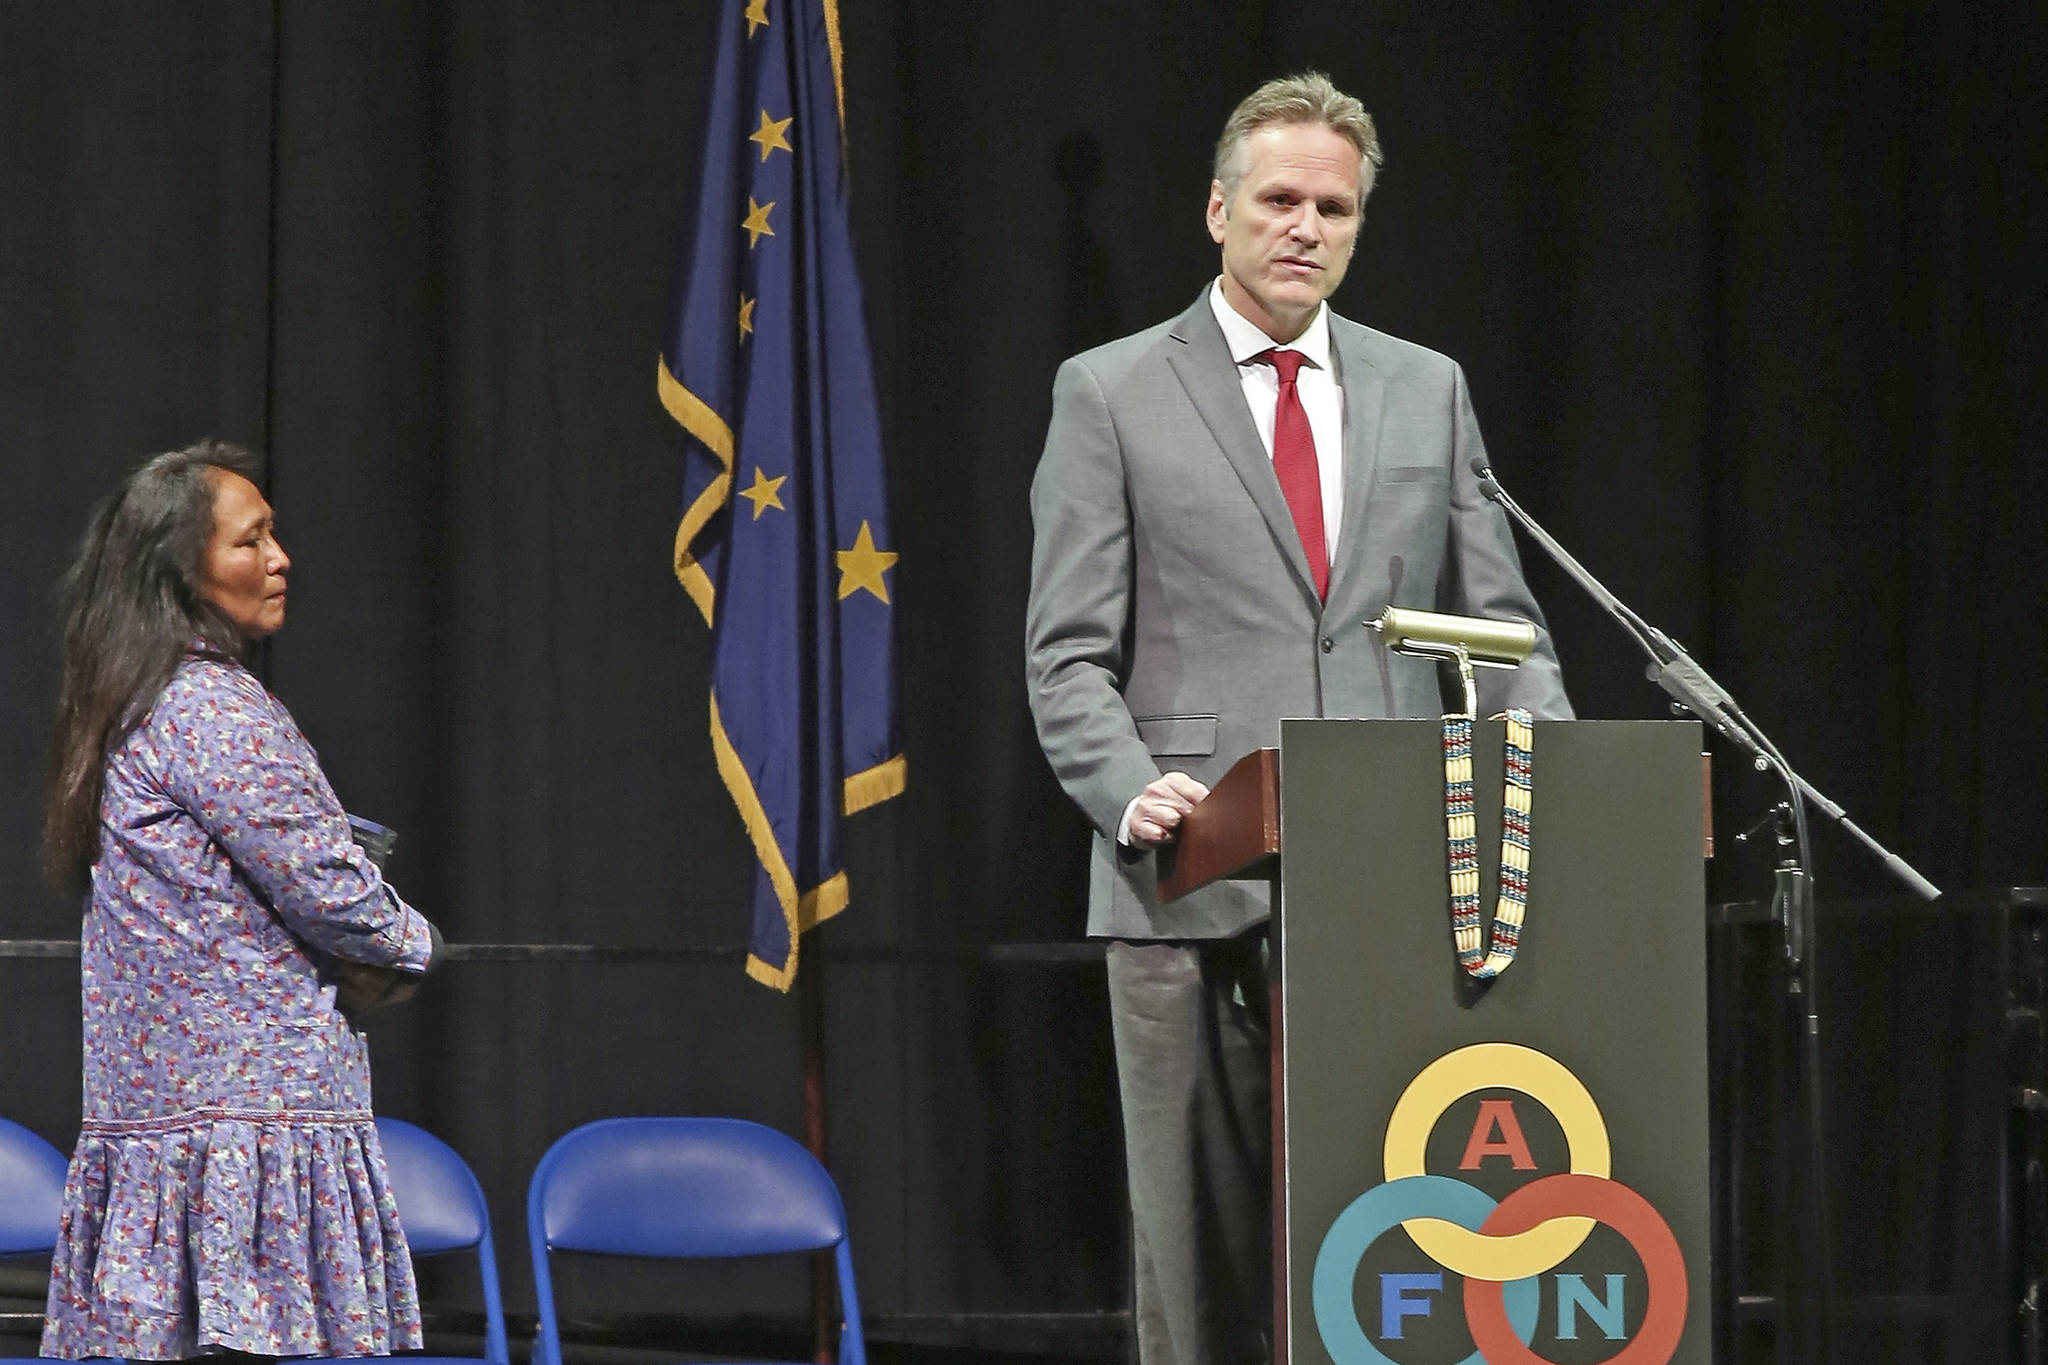 Gov. Mike Dunleavy gives his State of Alaska Address with his wife Rose Dunleavy at his side during the 2019 Alaska Federation of Natives Convention Thursday, Oct. 17, 2019, in Fairbanks, Alaska. Republican Alaska Gov. Mike Dunleavy outlined plans aimed at improving public safety in rural Alaska during a speech Thursday to a major gathering of Alaska Natives that was interrupted by protests. (Eric Engman/Fairbanks Daily News-Miner via AP)